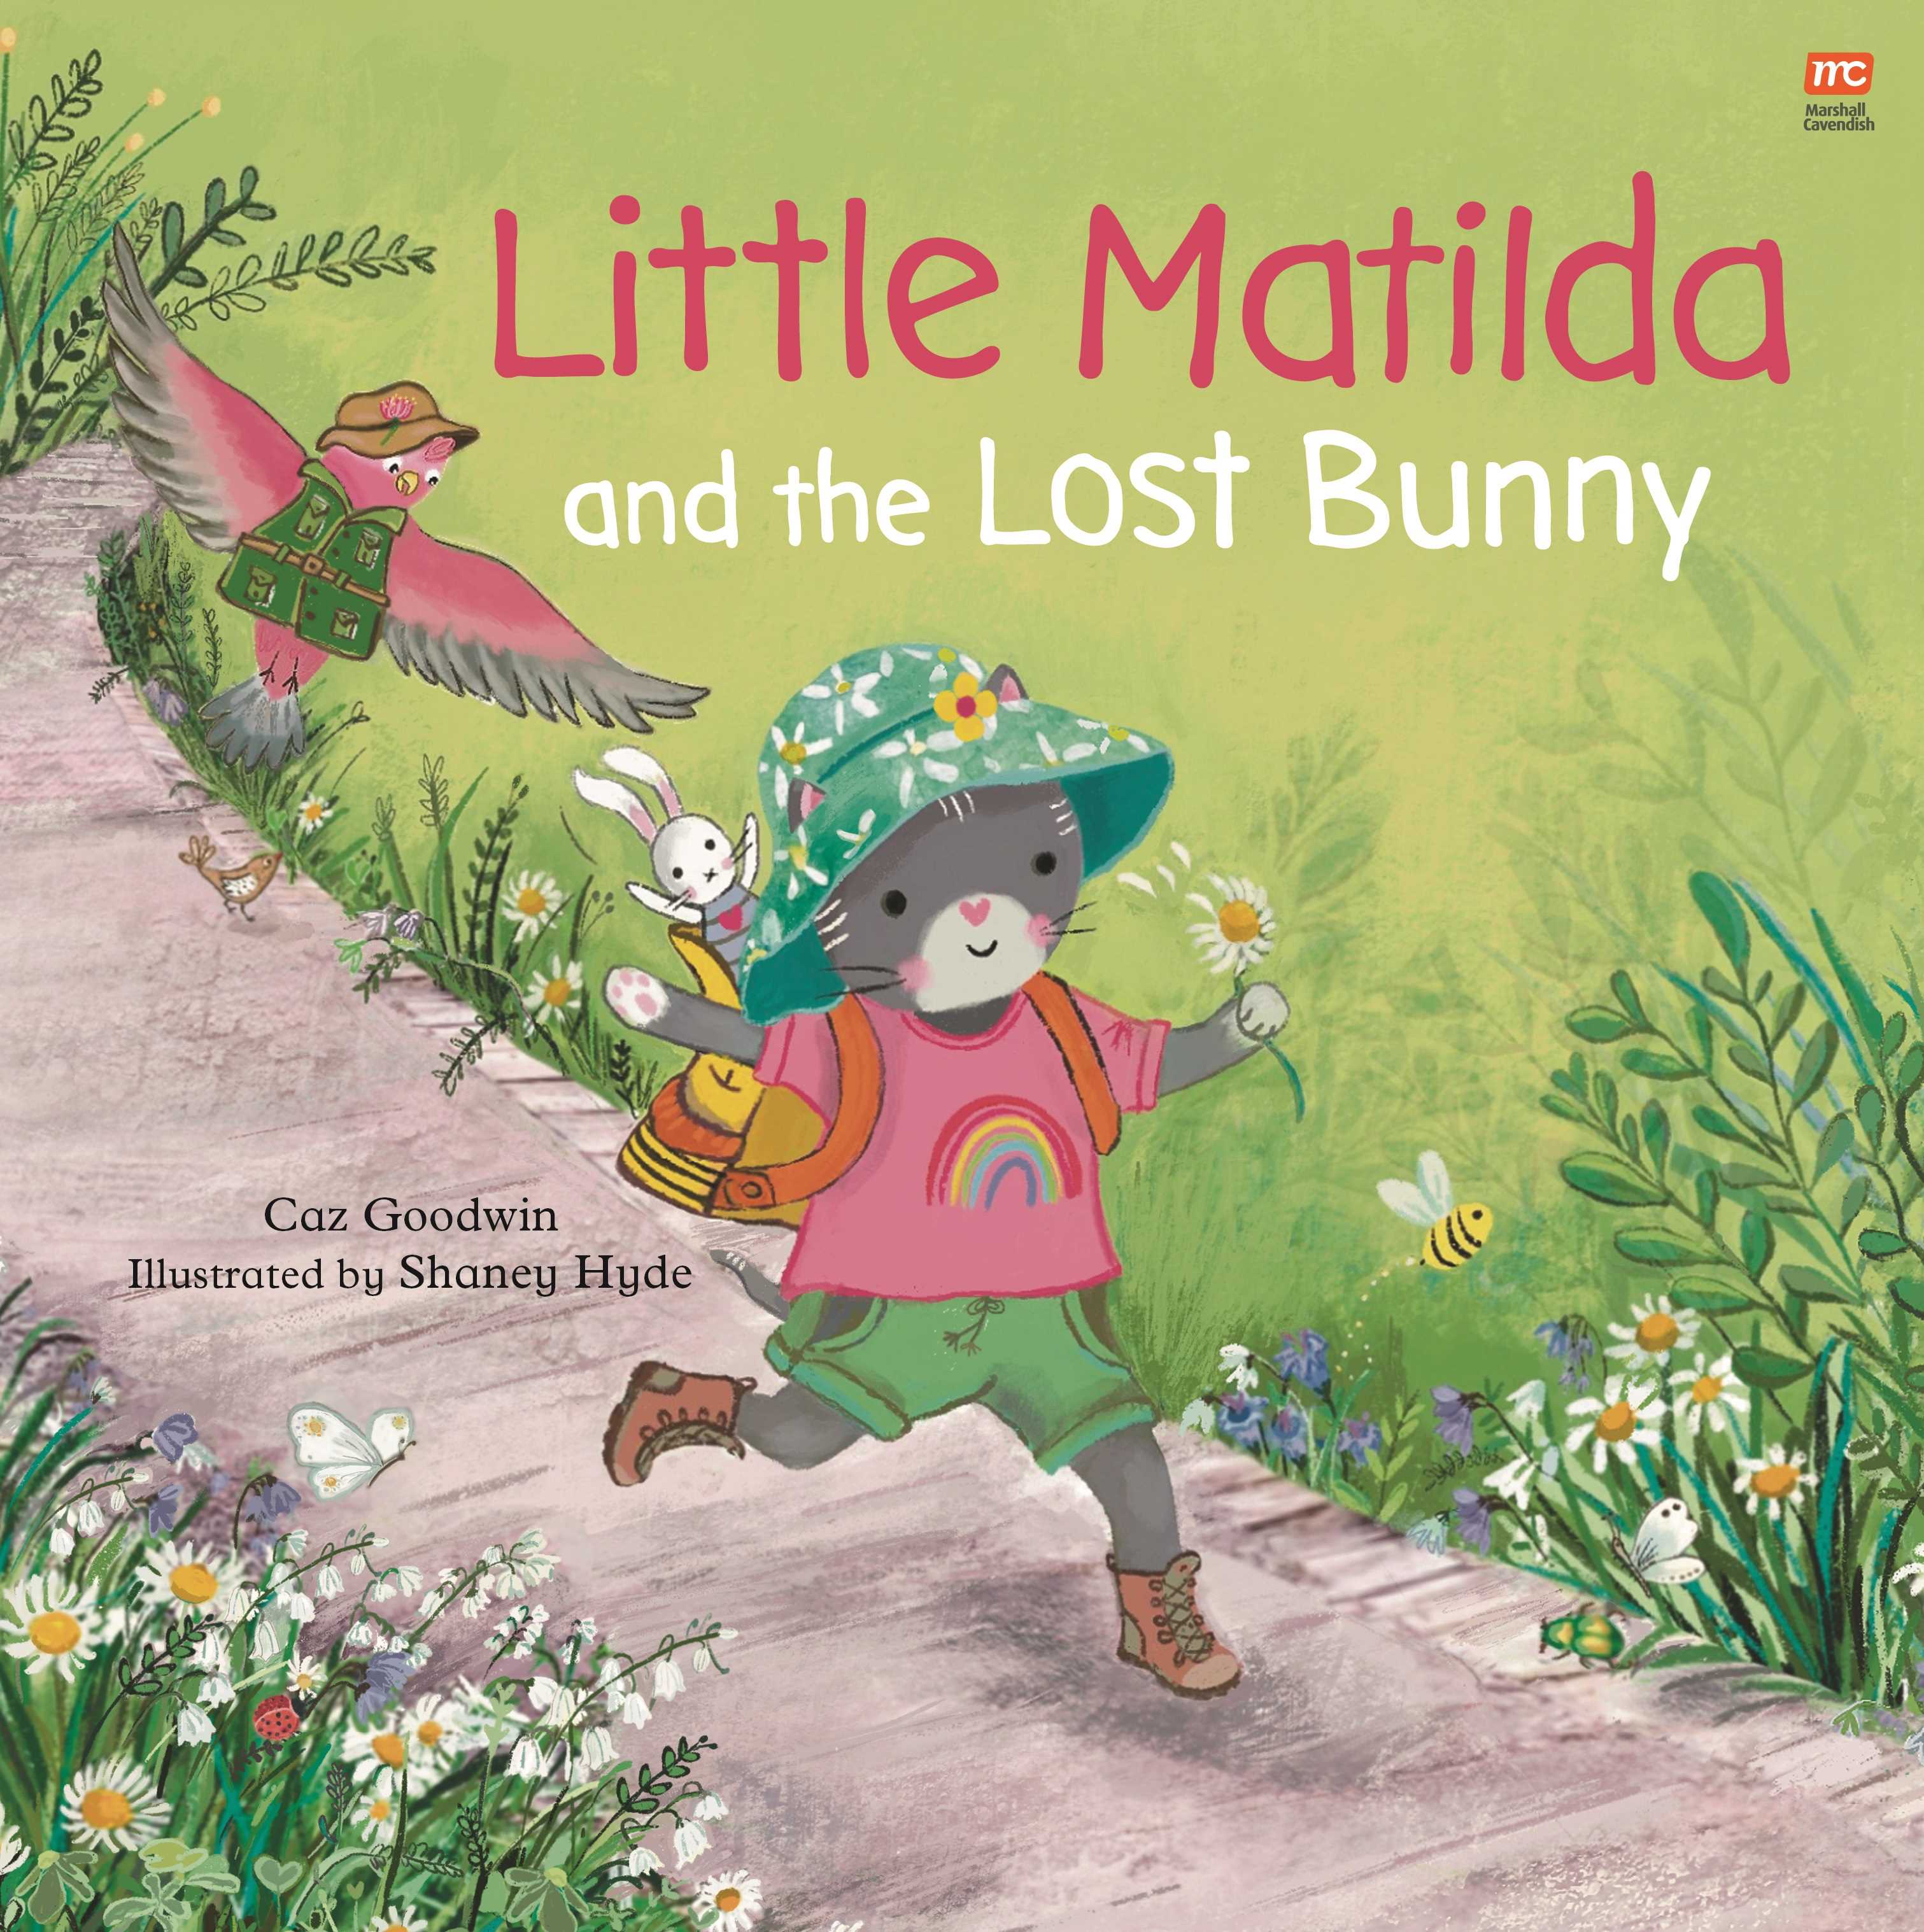 Little Matilda and the Lost Bunny